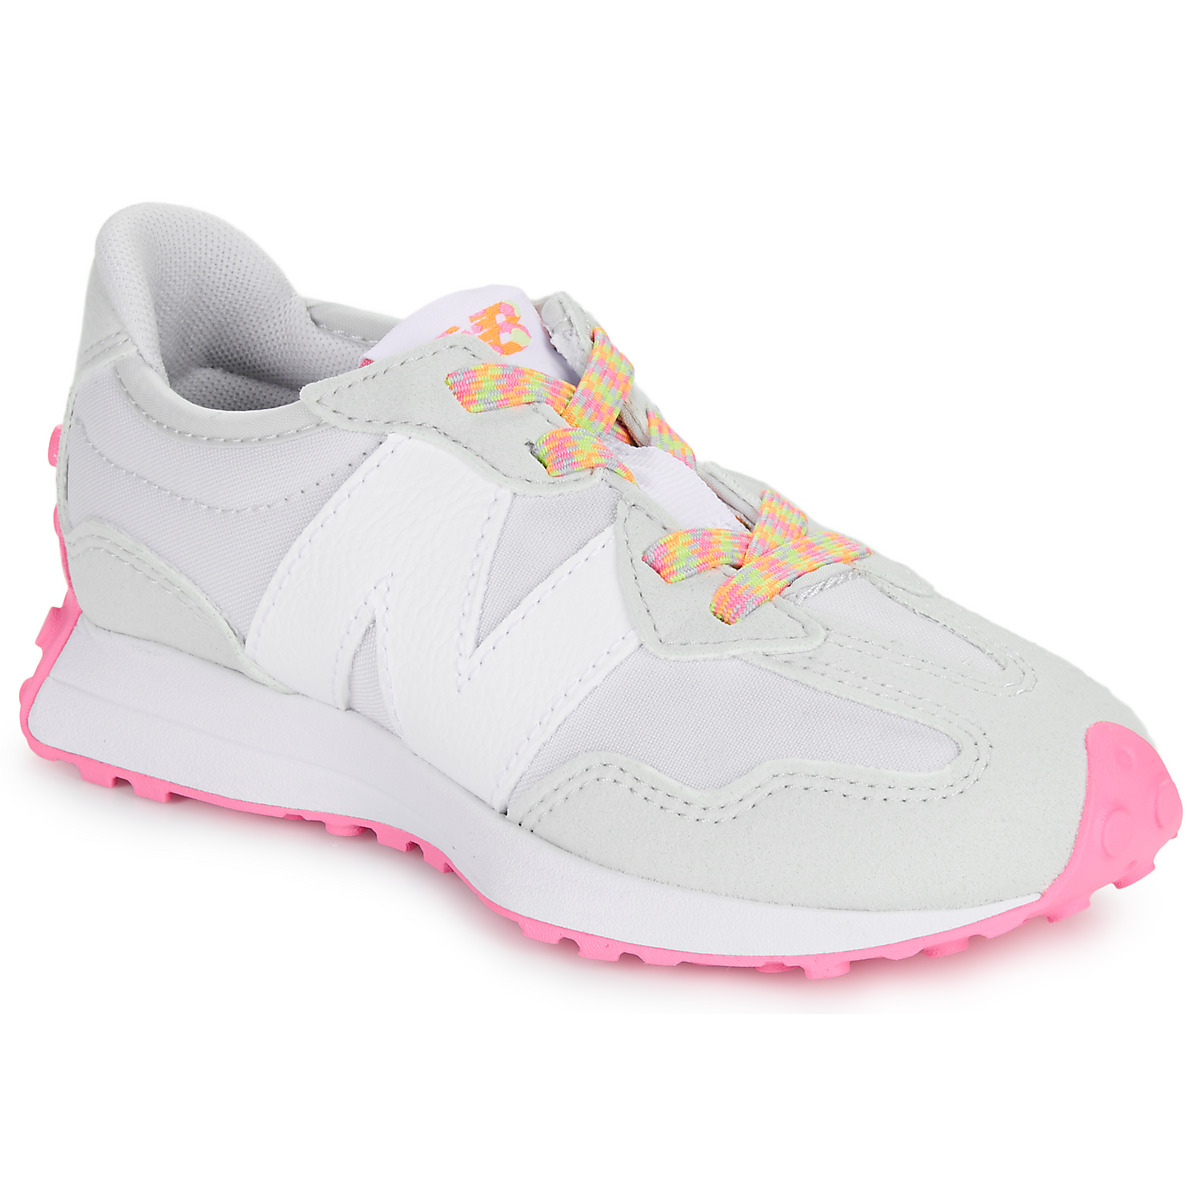 Chaussures Fille New Balance Hombre UL420v2 in Gris Azul 327 Beige / Rose